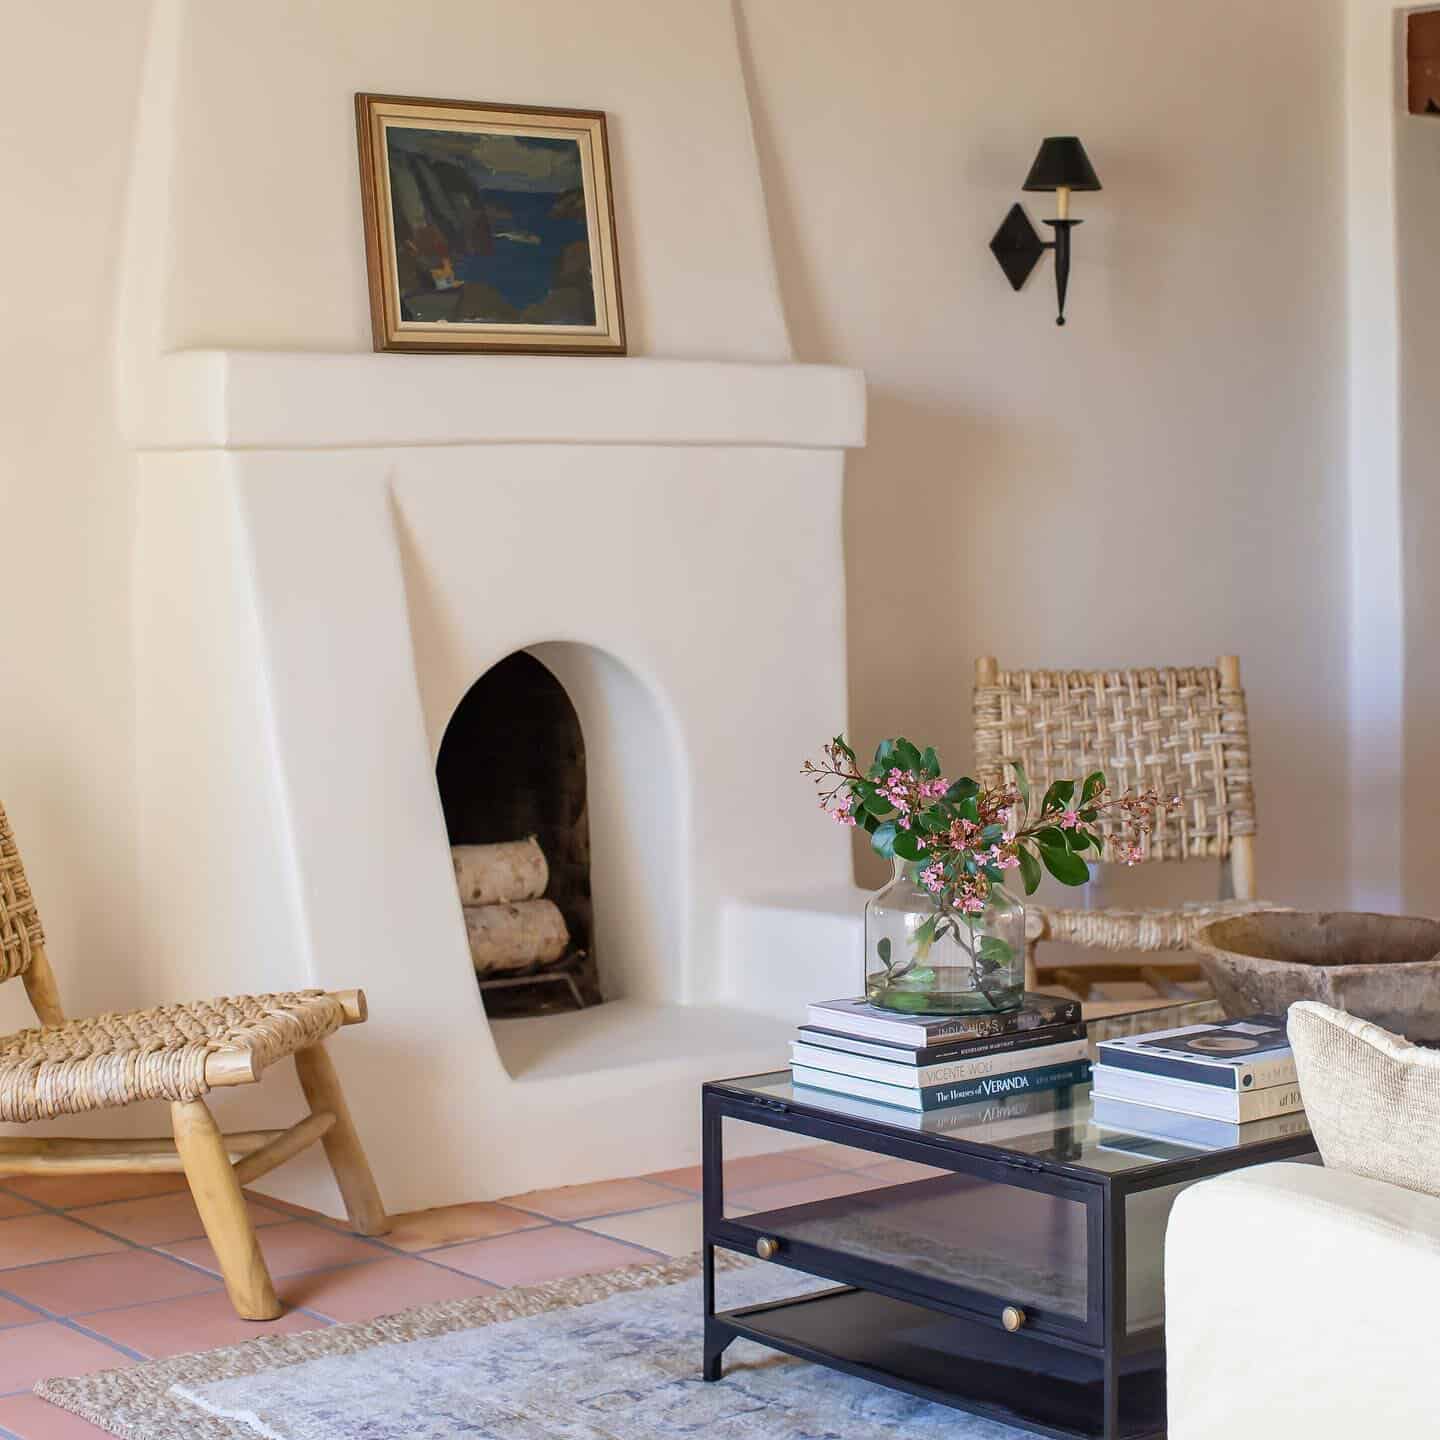 spanish-style-living-room-fireplace